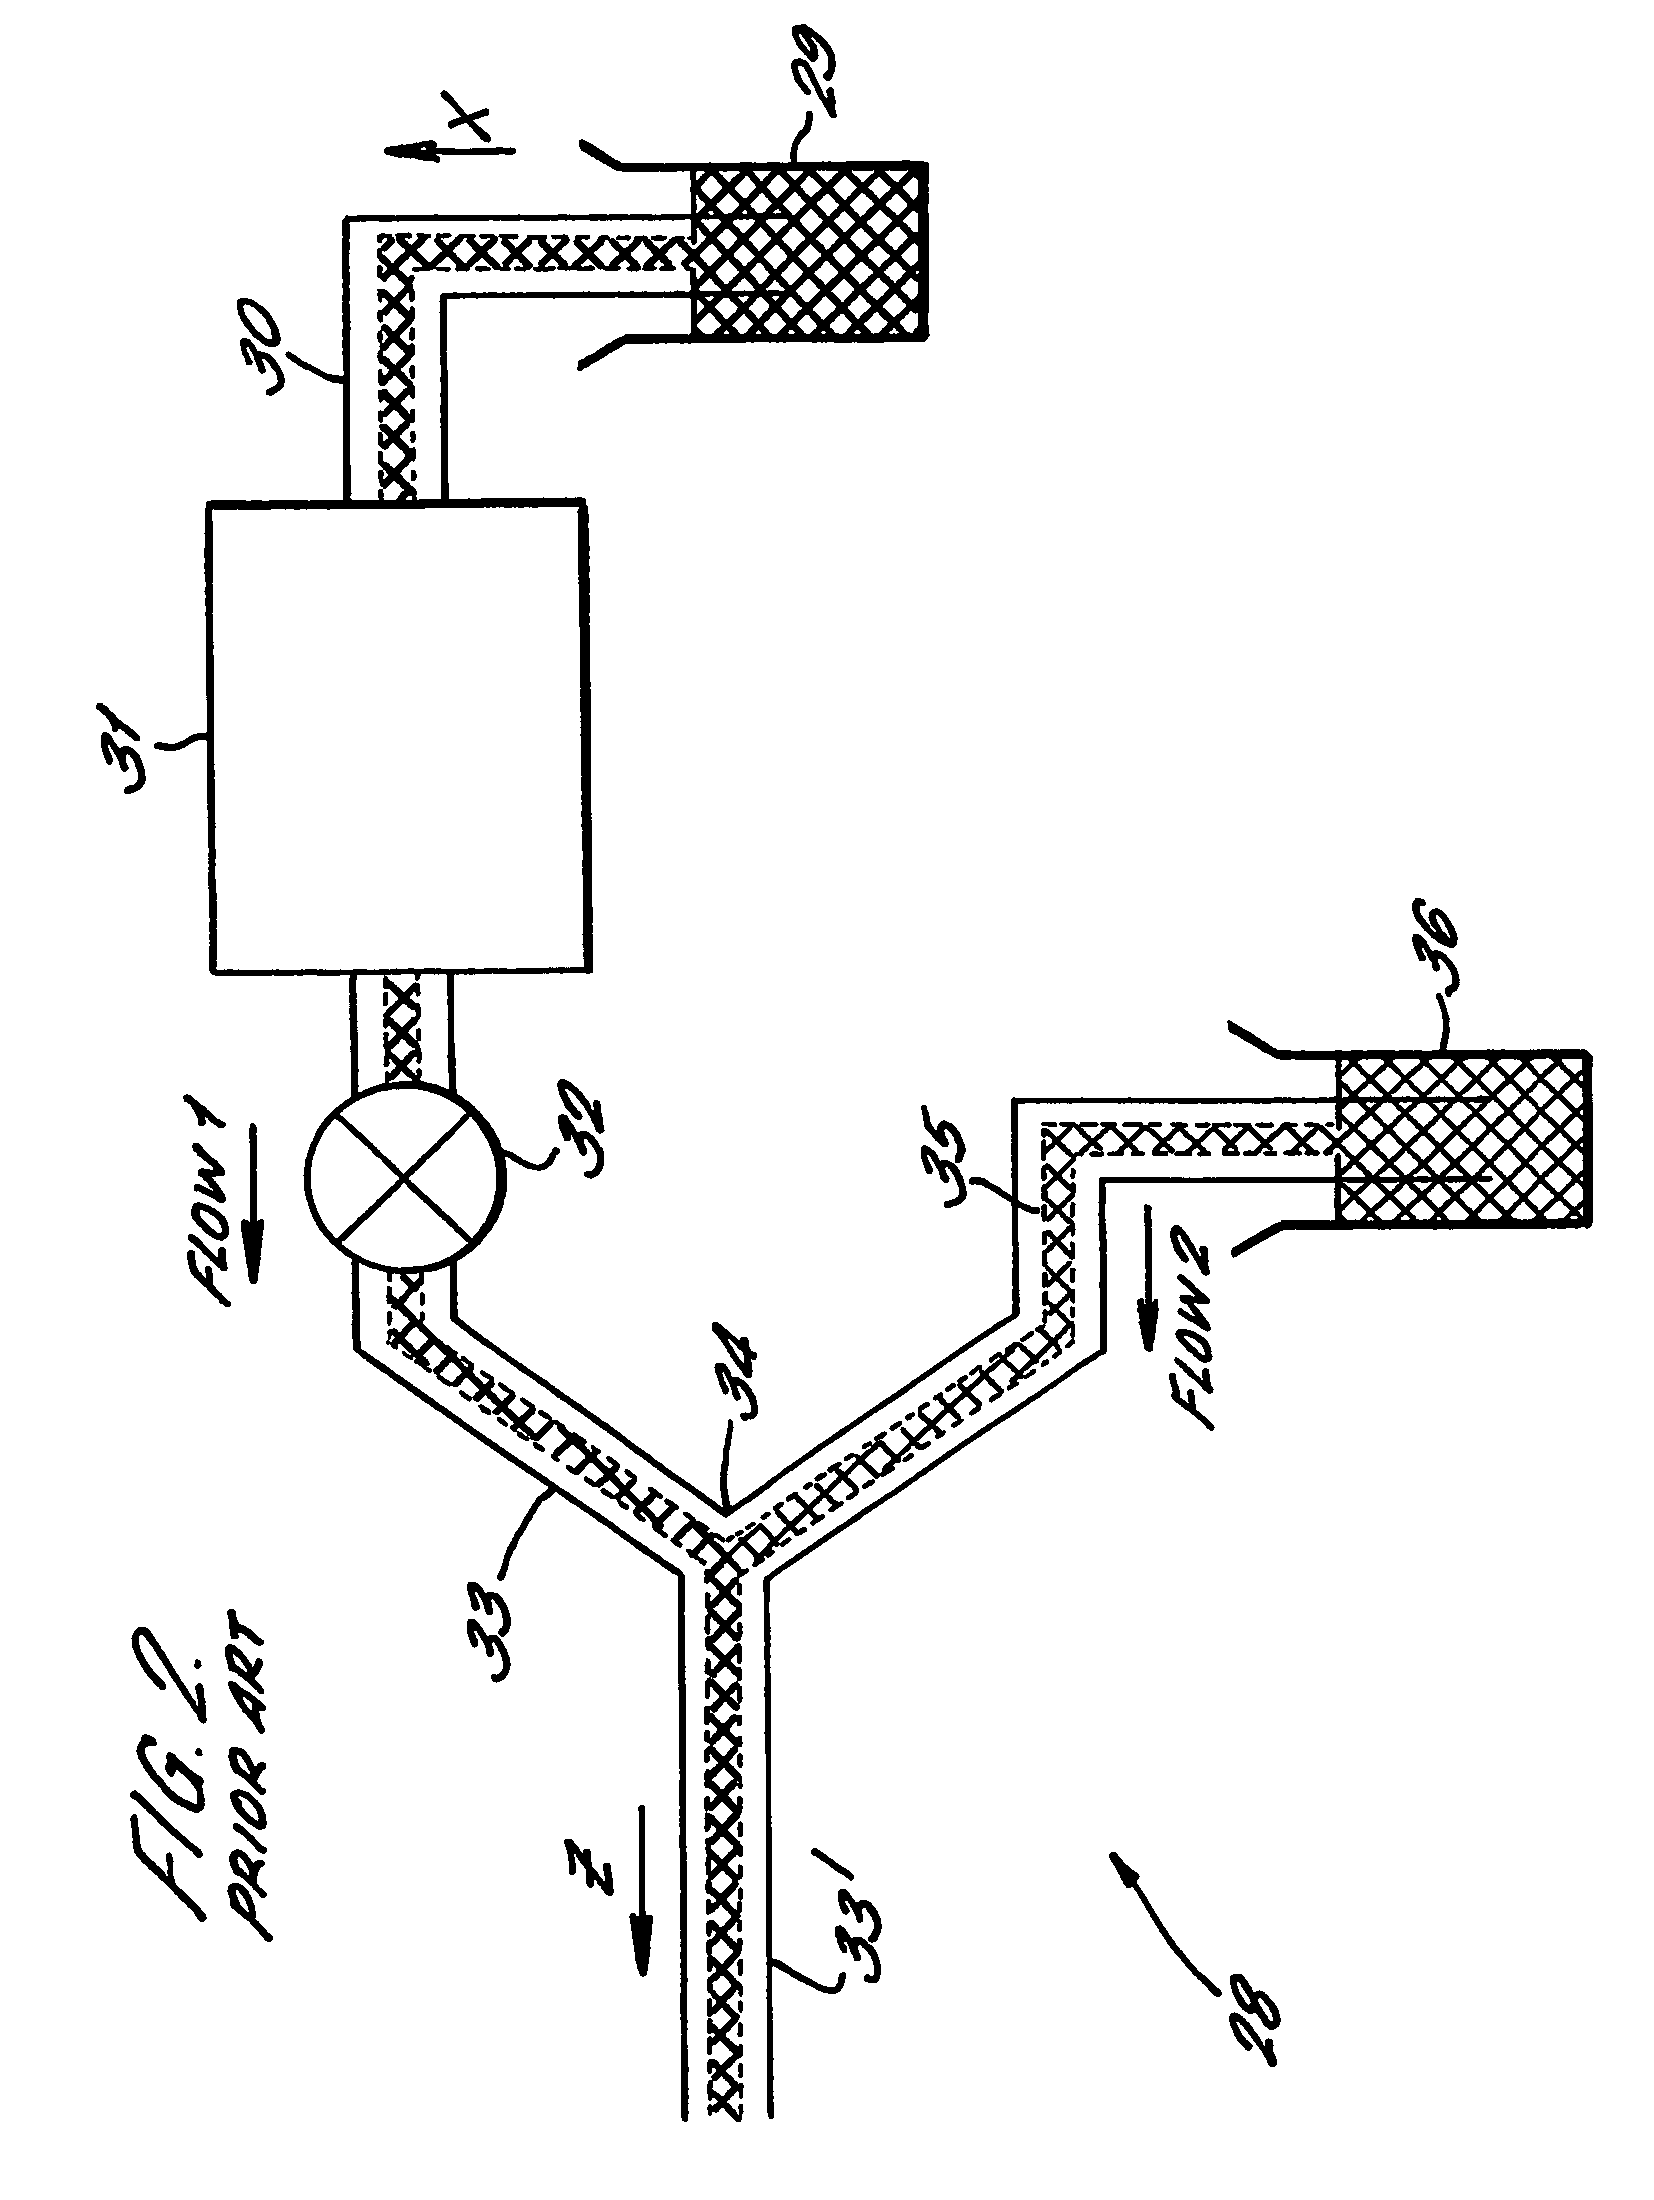 Device and method for diluting a sample